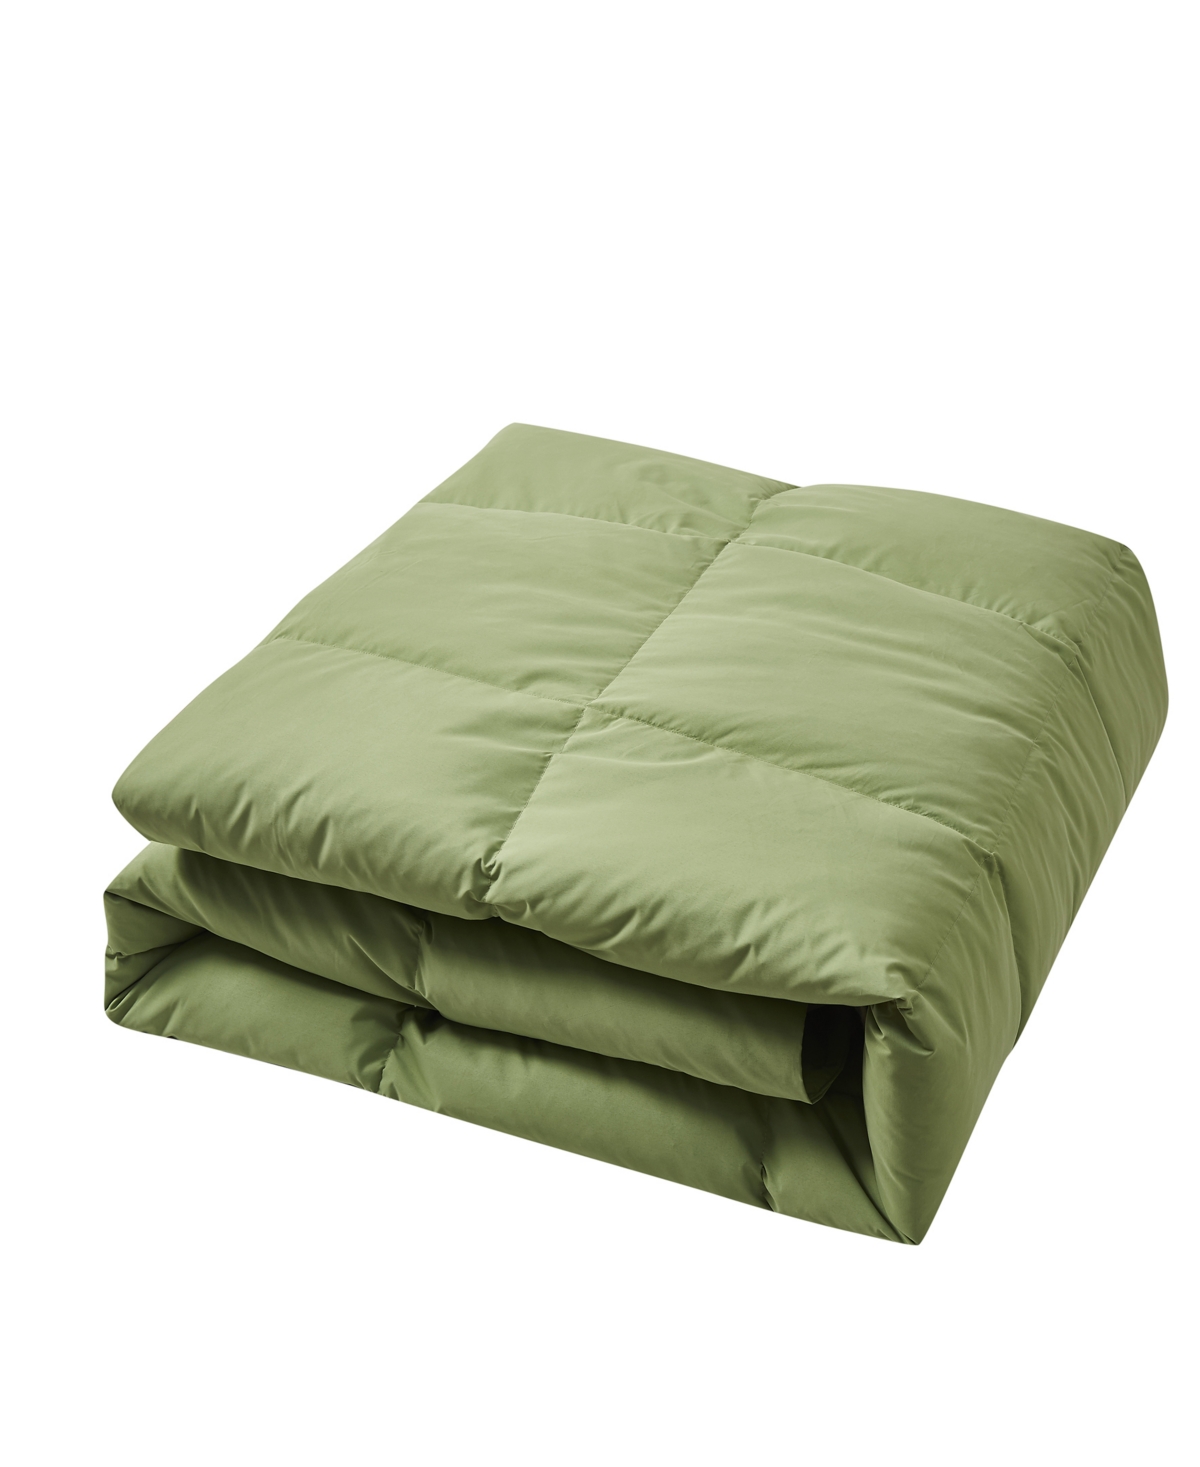 Beautyrest Microfiber Colored Feather & Down Comforter, Full/queen In Sage